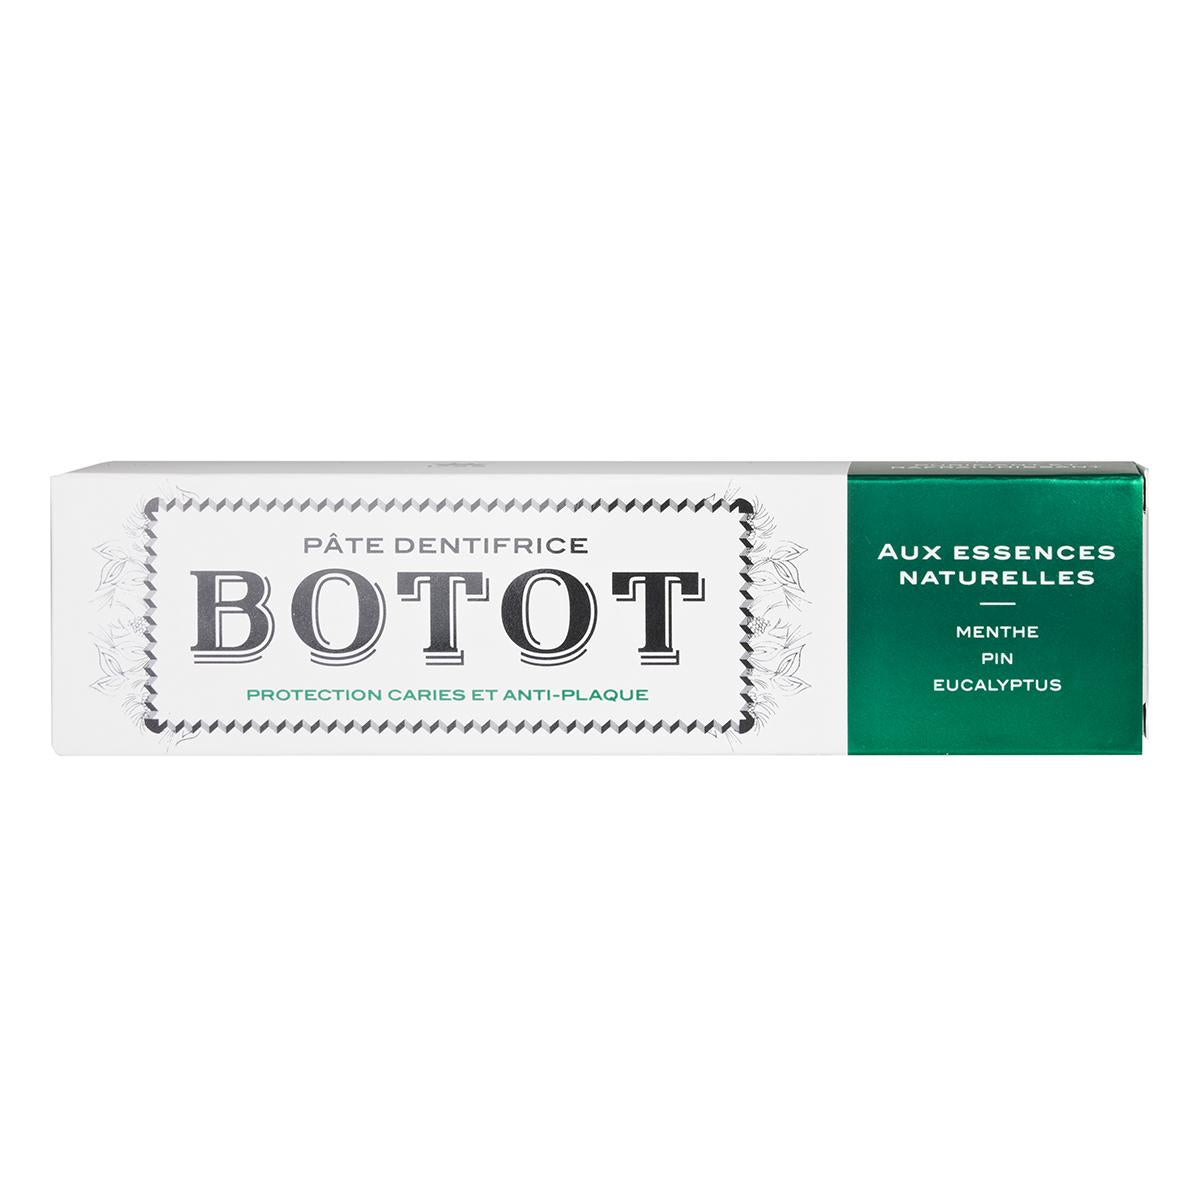 Primary image of Botot Green Toothpaste